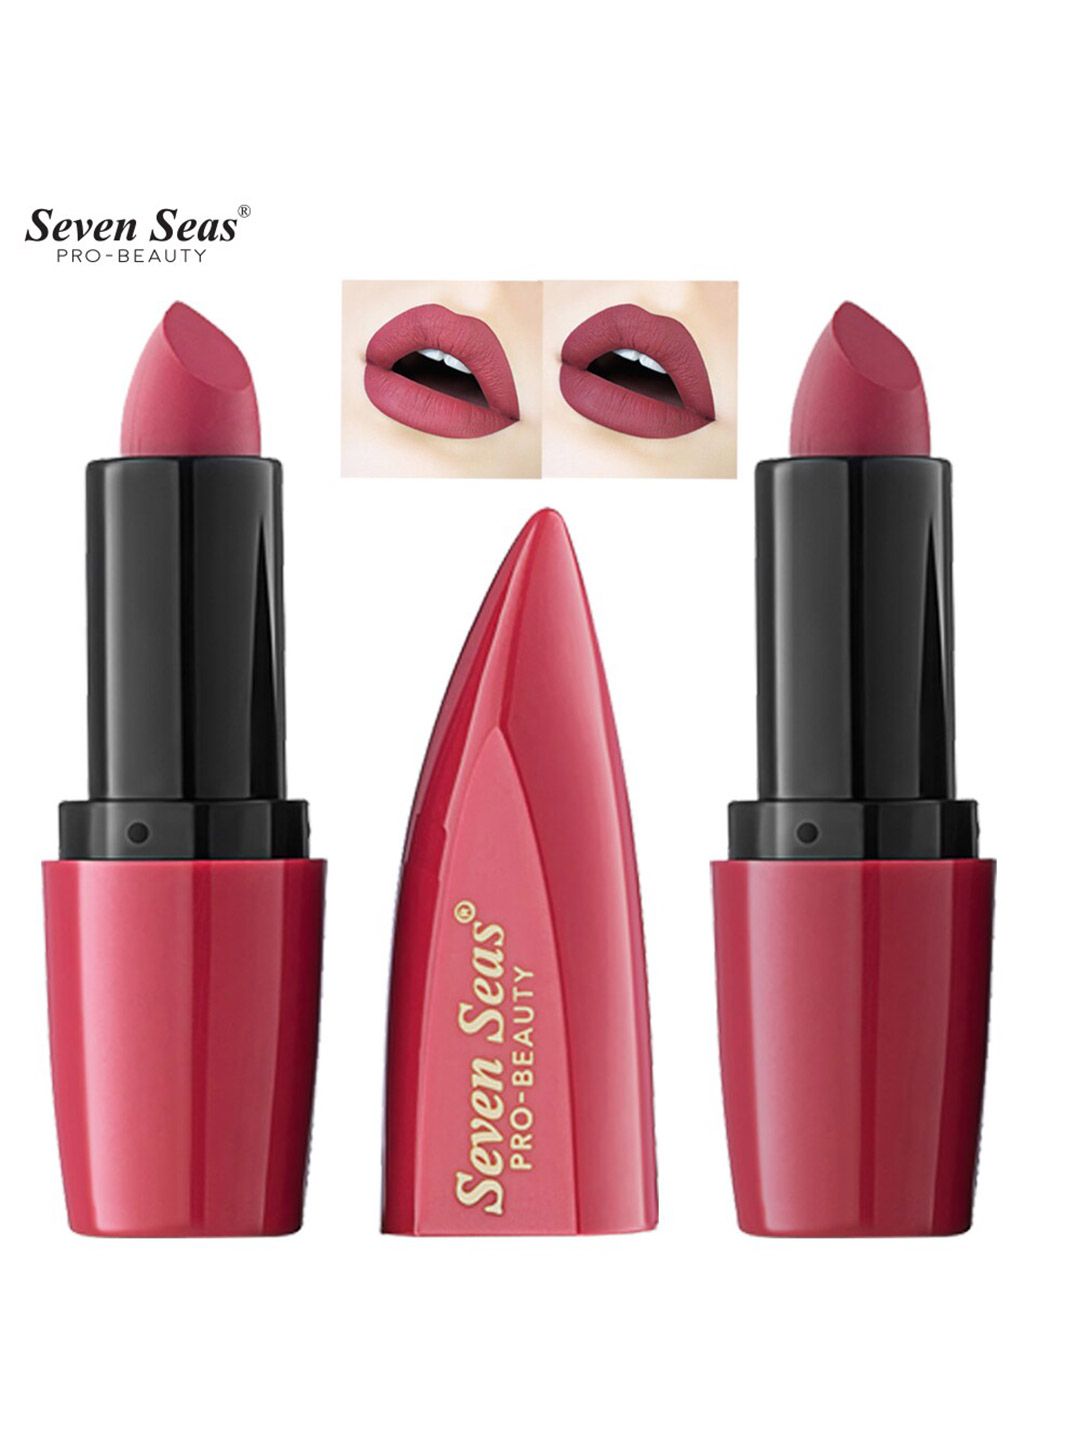 Seven Seas Set of 2 Ultimate Matte Full Coverage Lipstick - Chestnut Rose 301 & Roof 302 Price in India